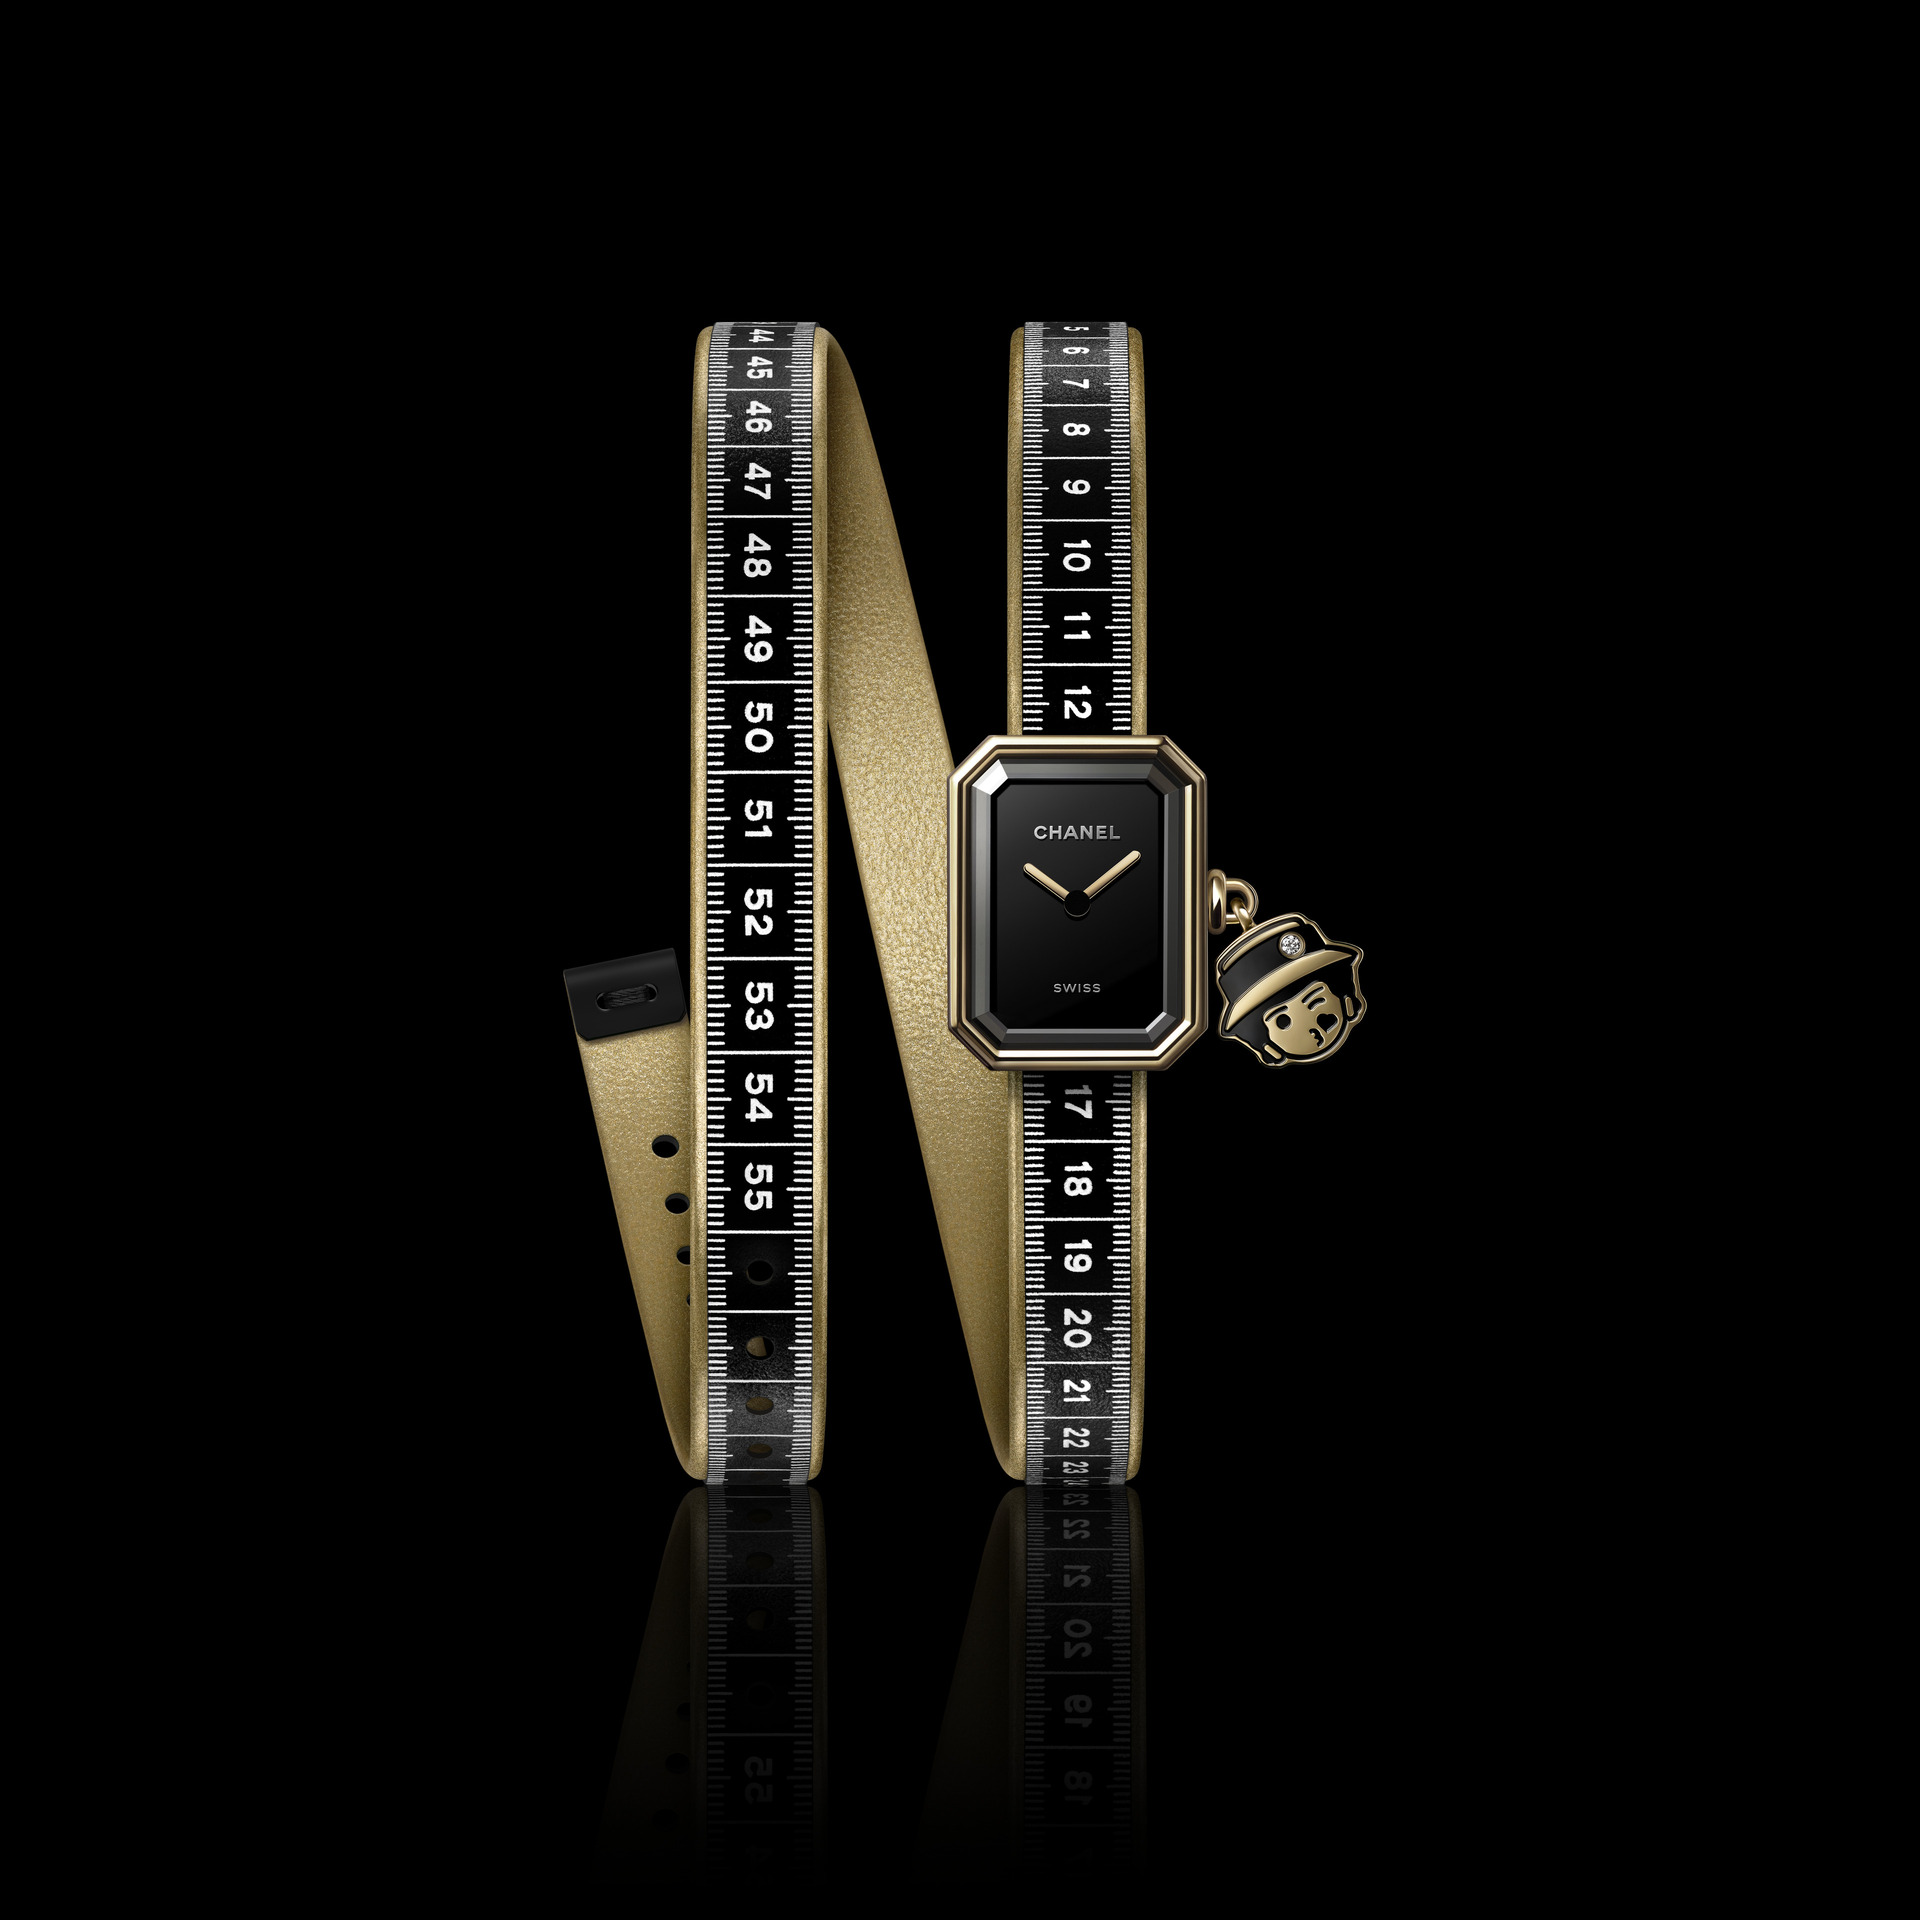 Chanel’s Première Ruban Couture Watch of the COUTURE O’CLOCK Collection